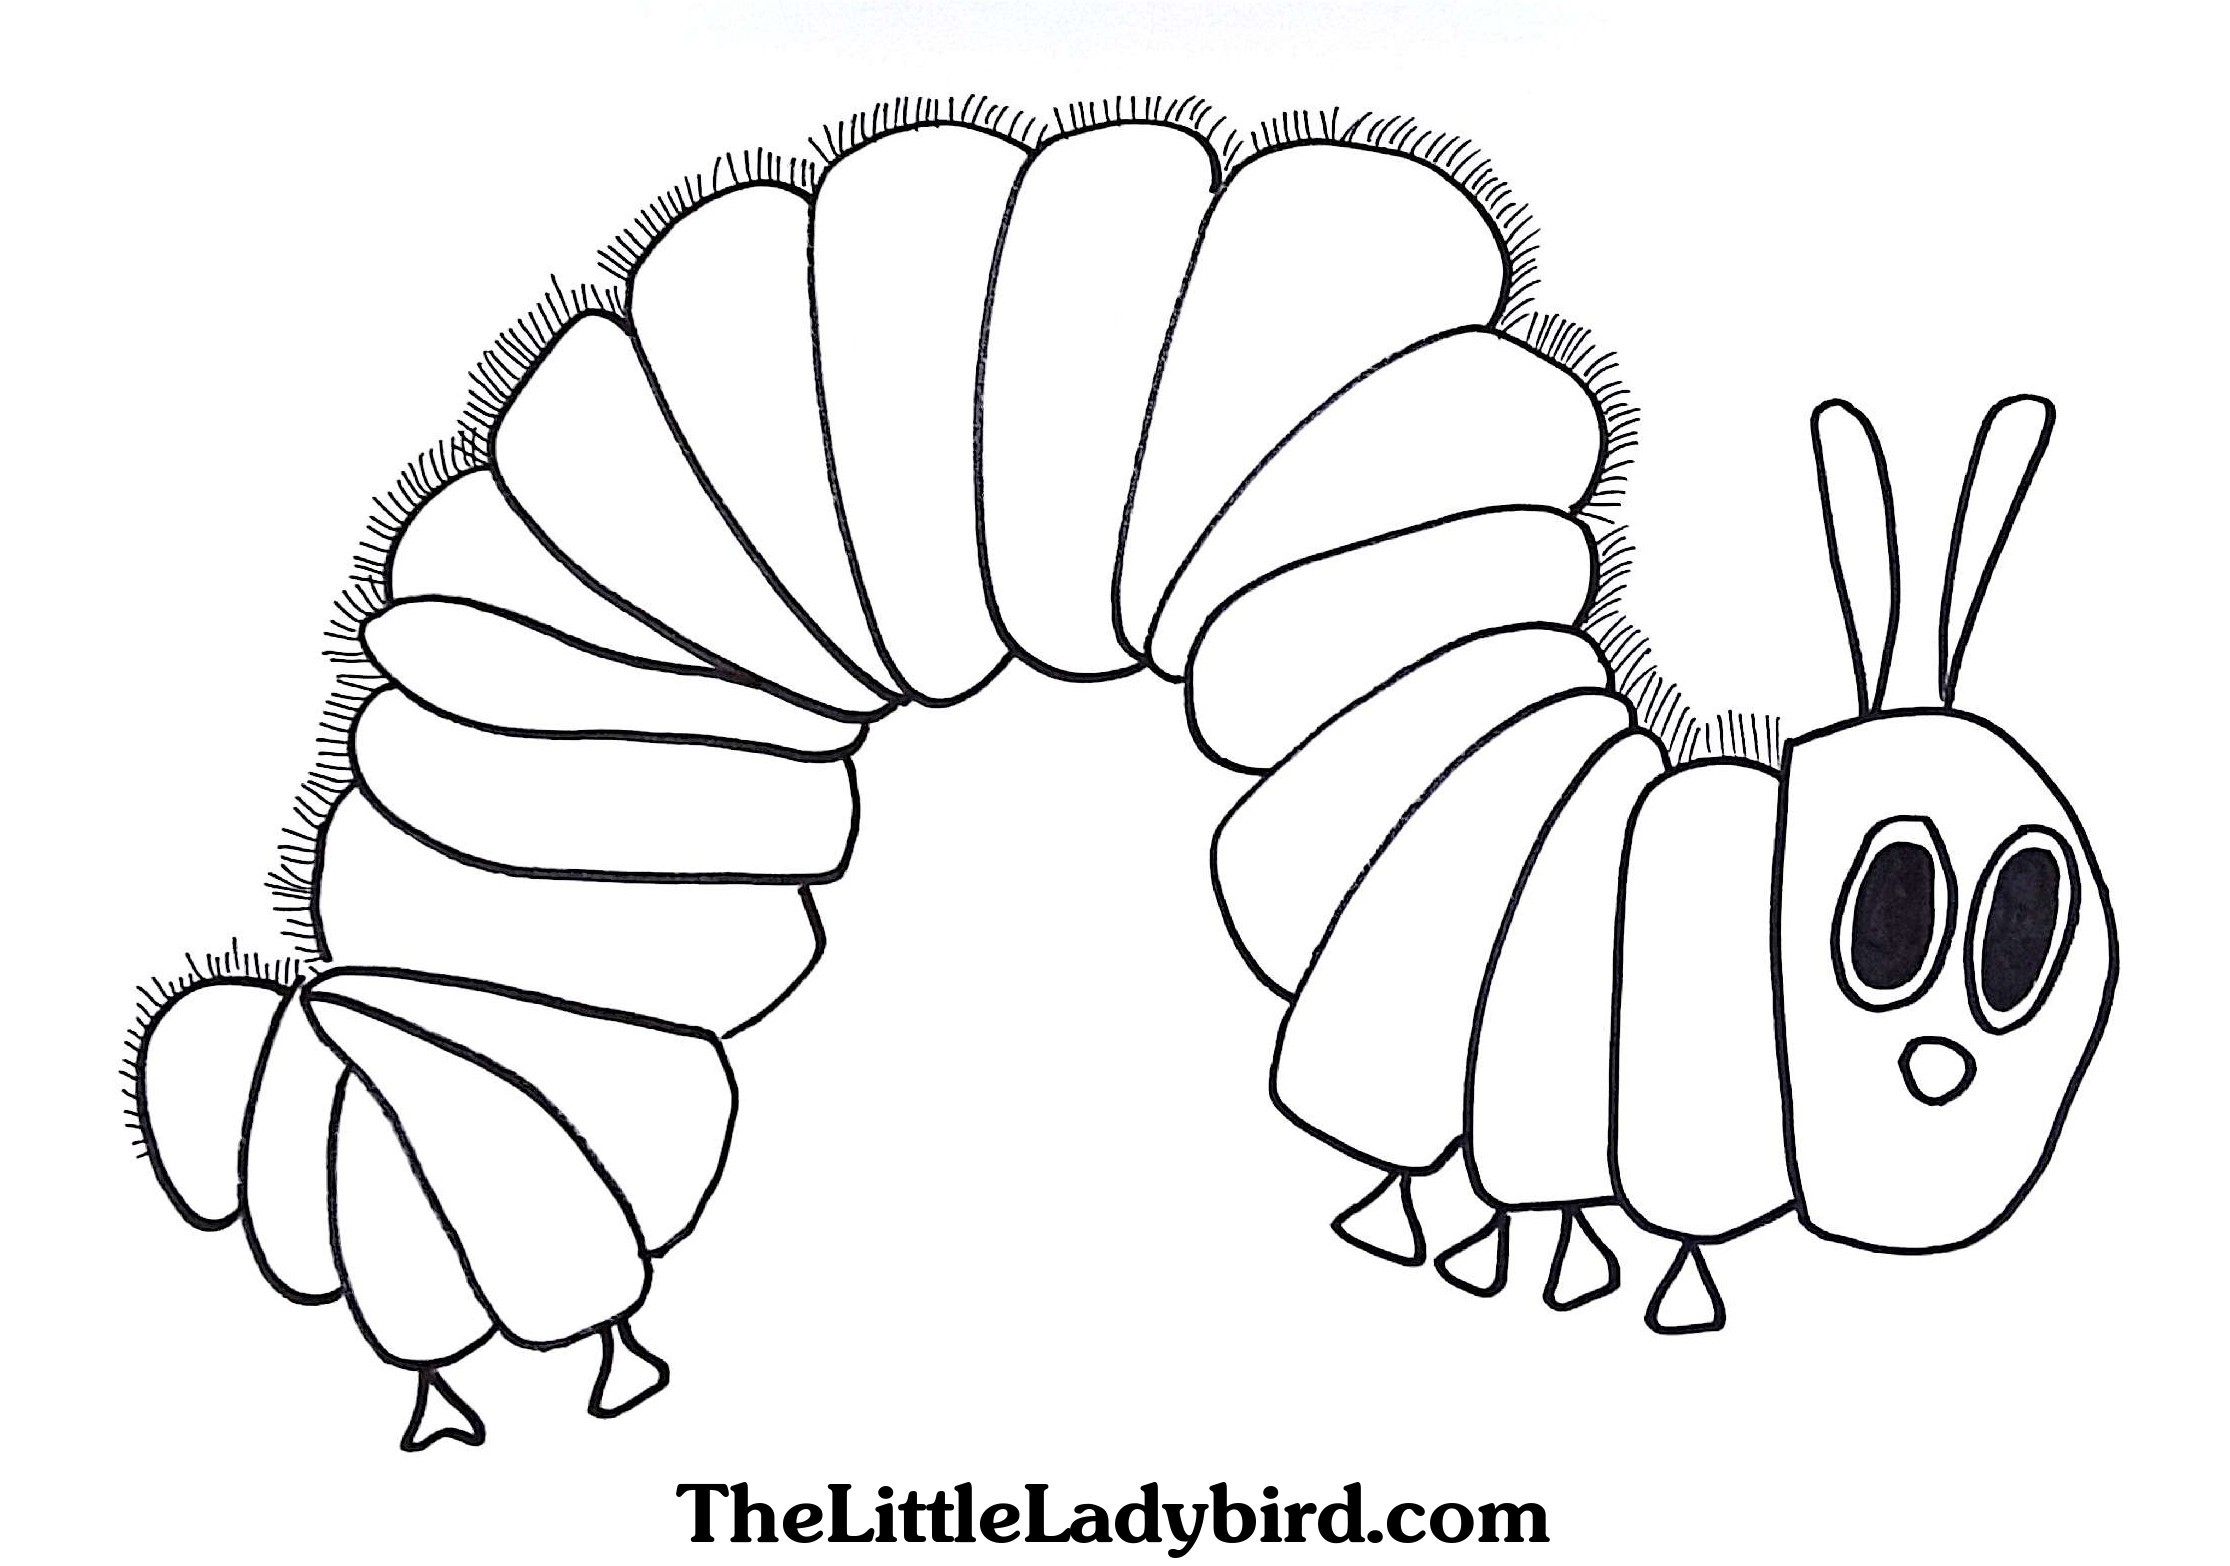 Catepillar Coloring Pages
 Very Hungry Caterpillar Coloring Pages Printables free